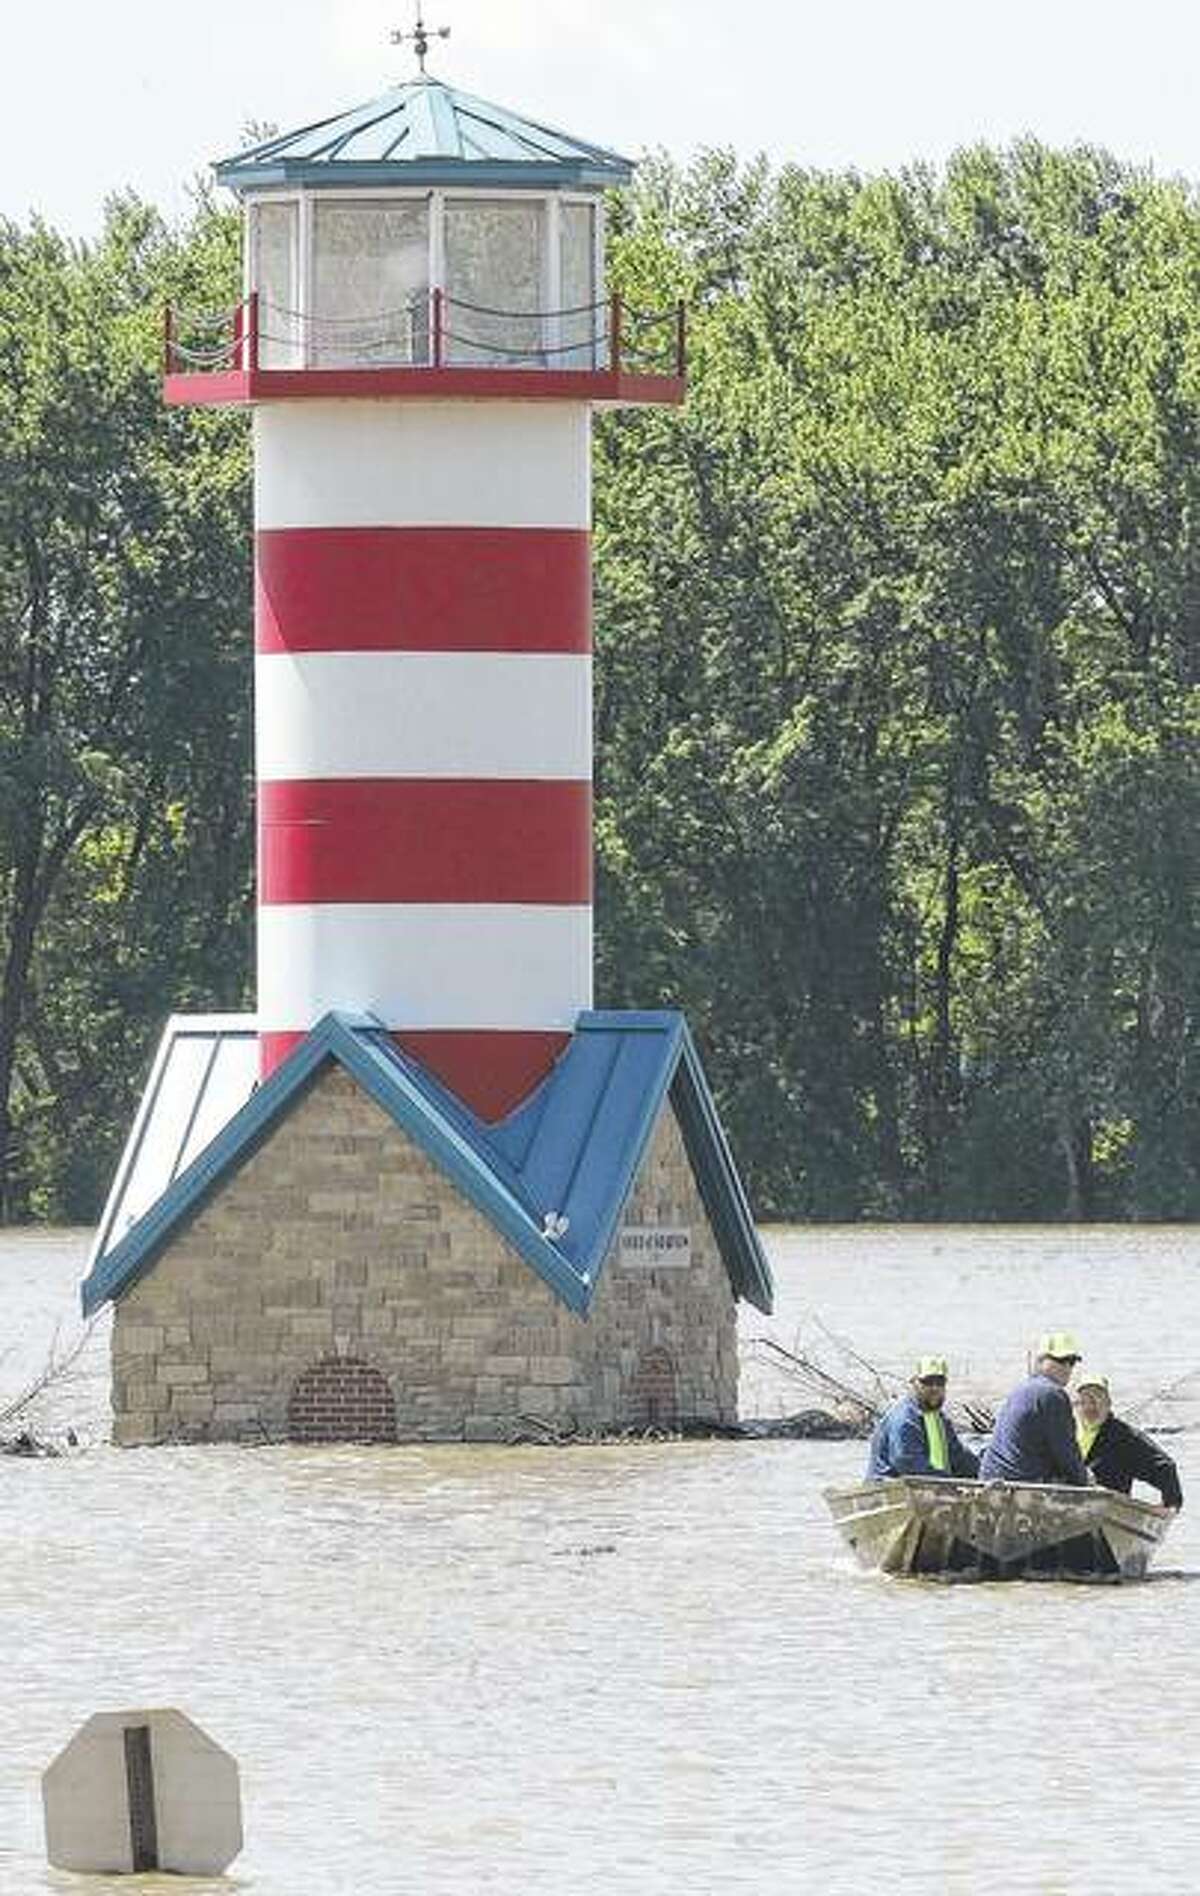 Workers from the Grafton Public Works Department travel by boat back to land after moving logs on the riverfront. Flood warnings remain for large sections of west-central and southern Illinois after weekend storms brought several inches of rain and more rain Wednesday keep waters from receding.